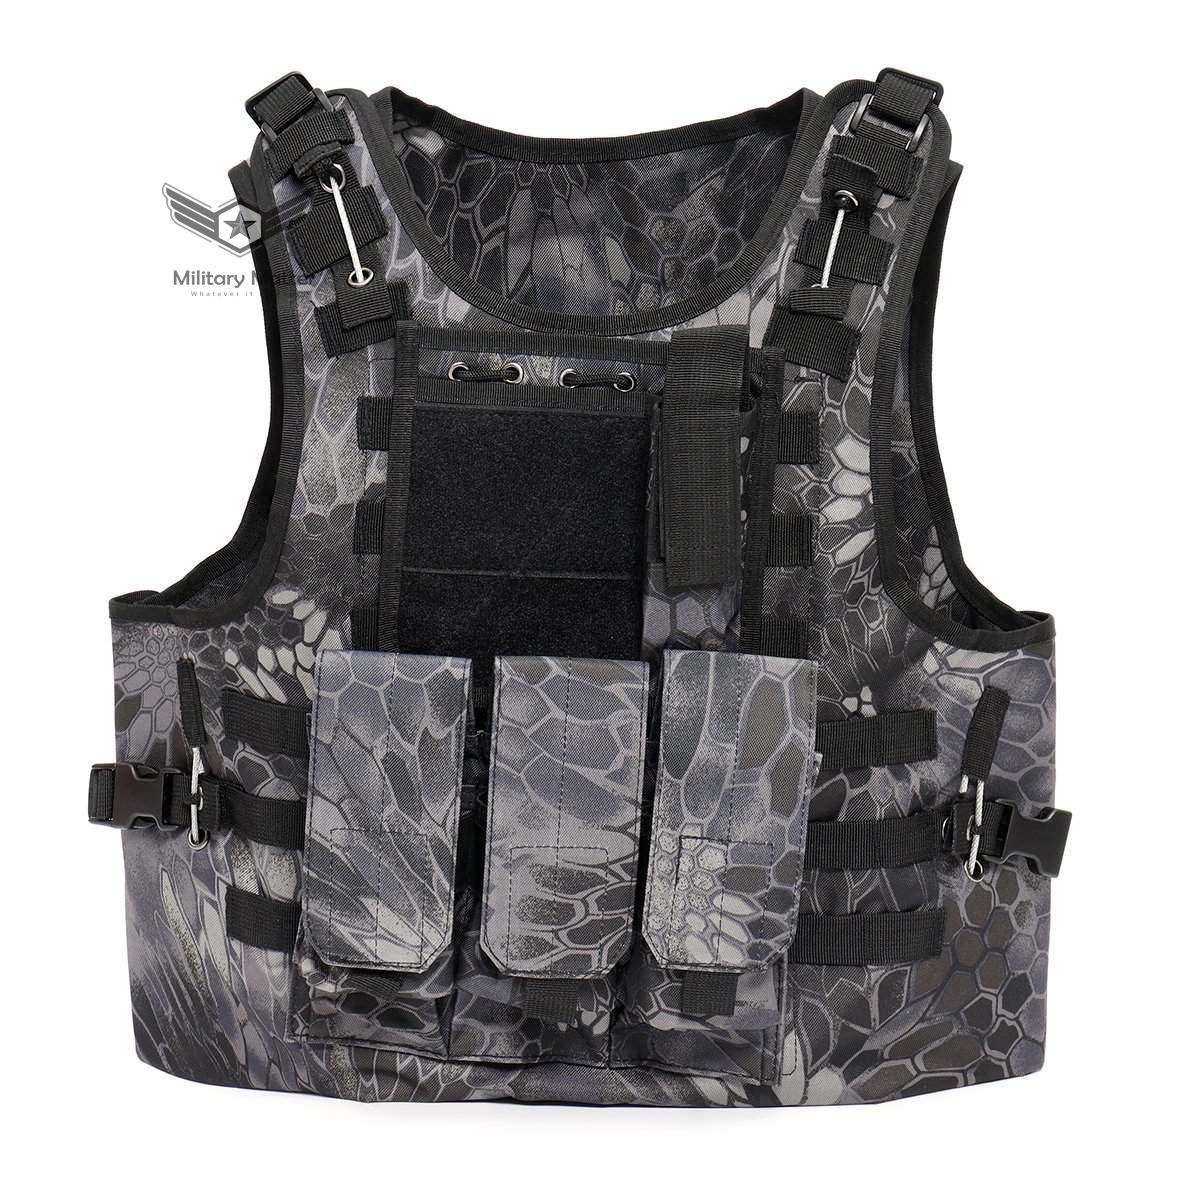  Military Matter Military Tactical Assault Plate Carrier Outdoor Hunting Vest | The Best CS Tactical Clothing Store